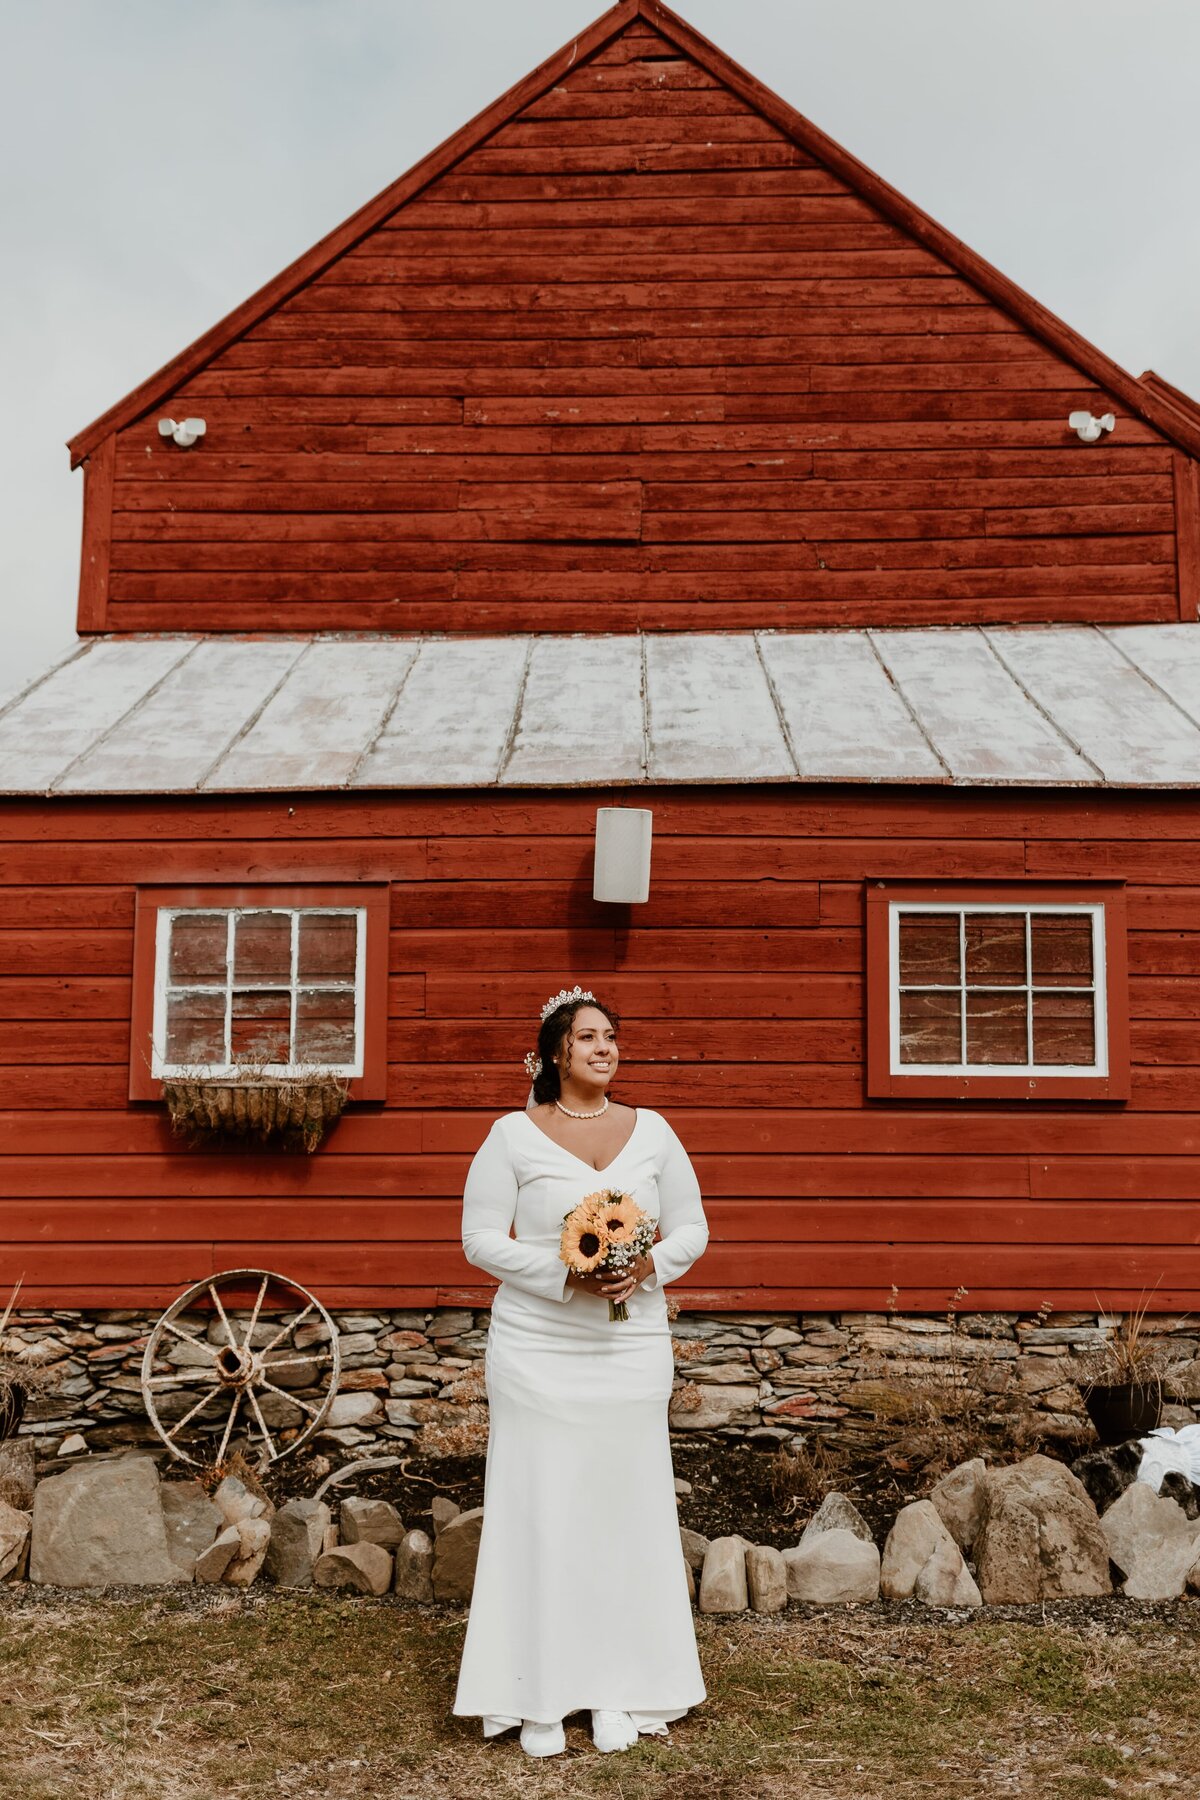 A smiling bride holding a bouquet of sunflowers stands in front of a rustic red barn at Black Snake Brewing Company on Old Adriance Farm. The barn features a quaint window with a flower box and a vintage wheel decoration to the side.